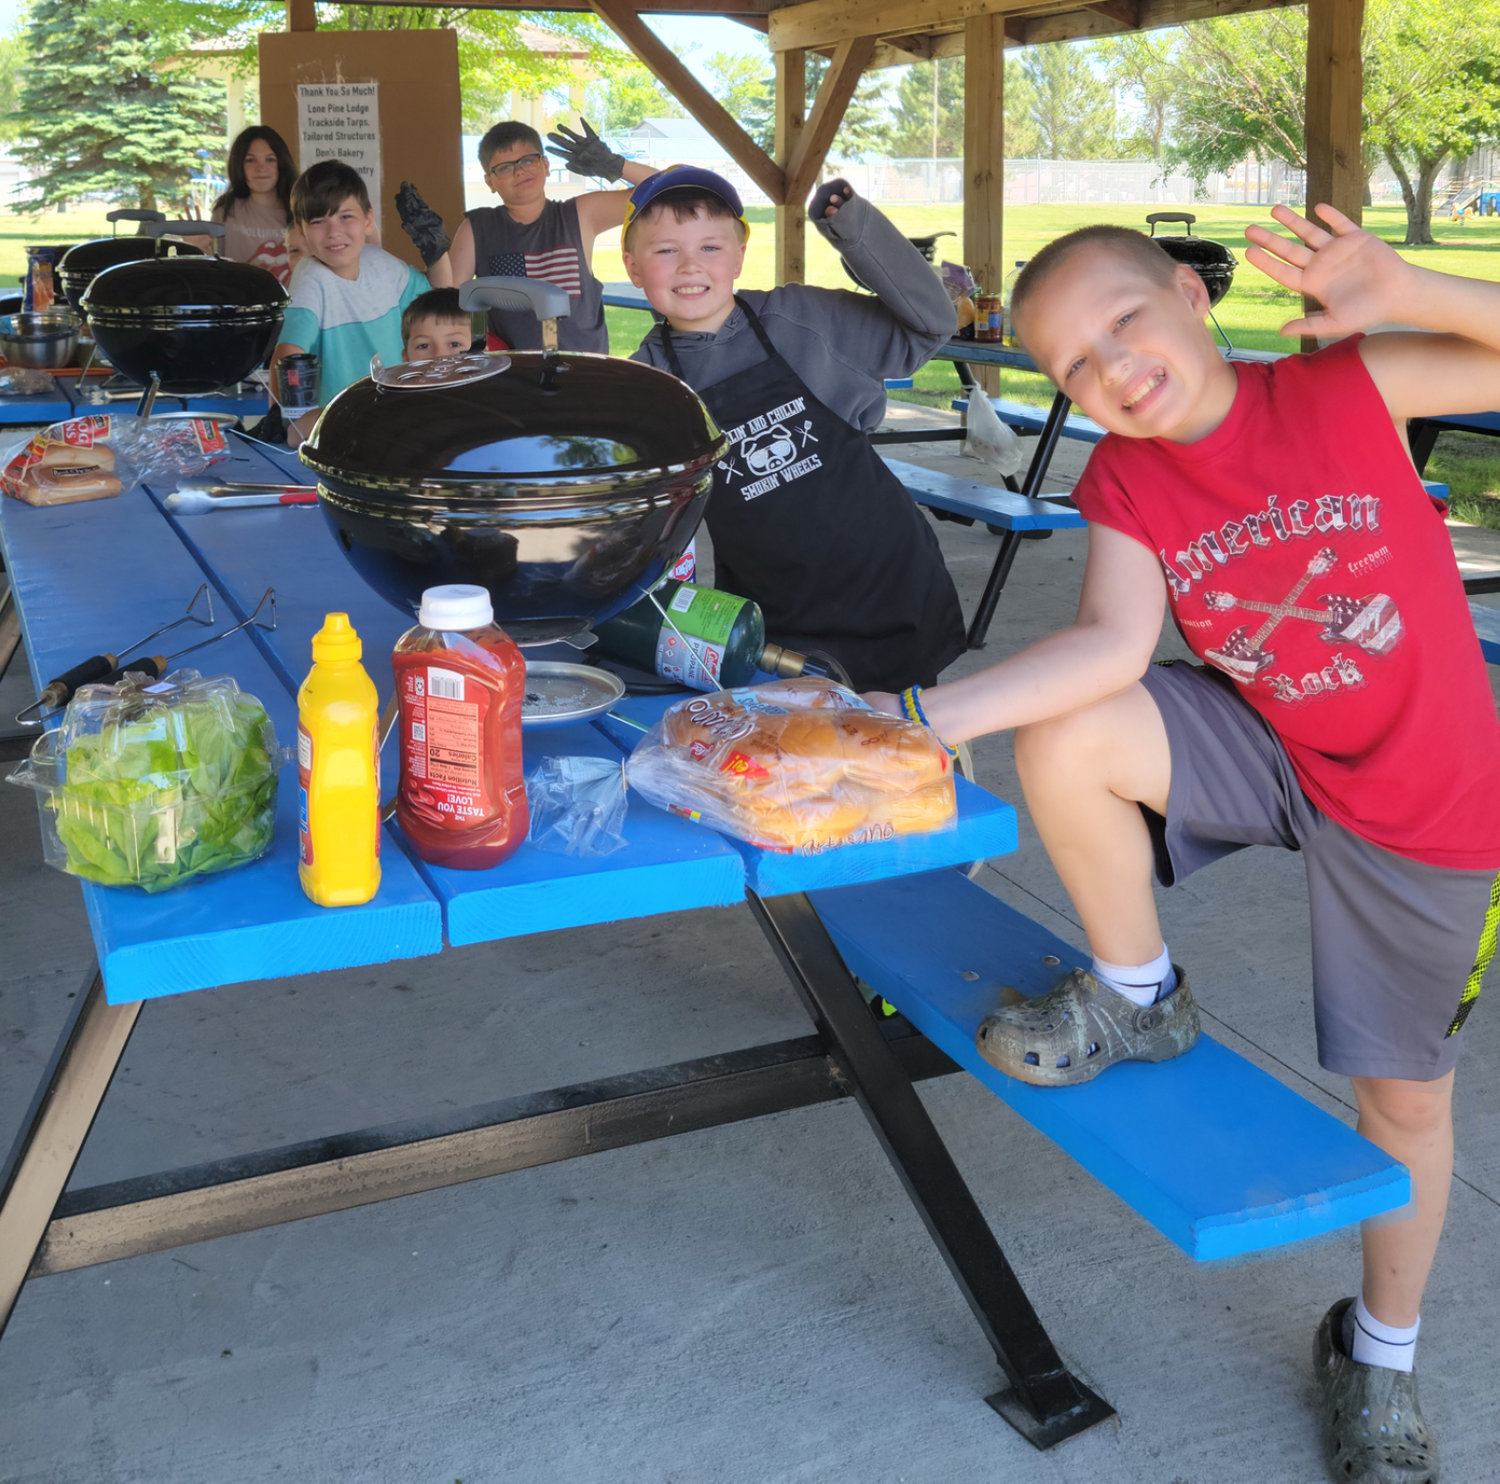 There was a Kids Que competition on Saturday with eight kids participated in the hot dog making contest and 13 in the hamburger contest. These kids found some clever ways to dress up their food like putting condiments on them and making pigs in a blankets.